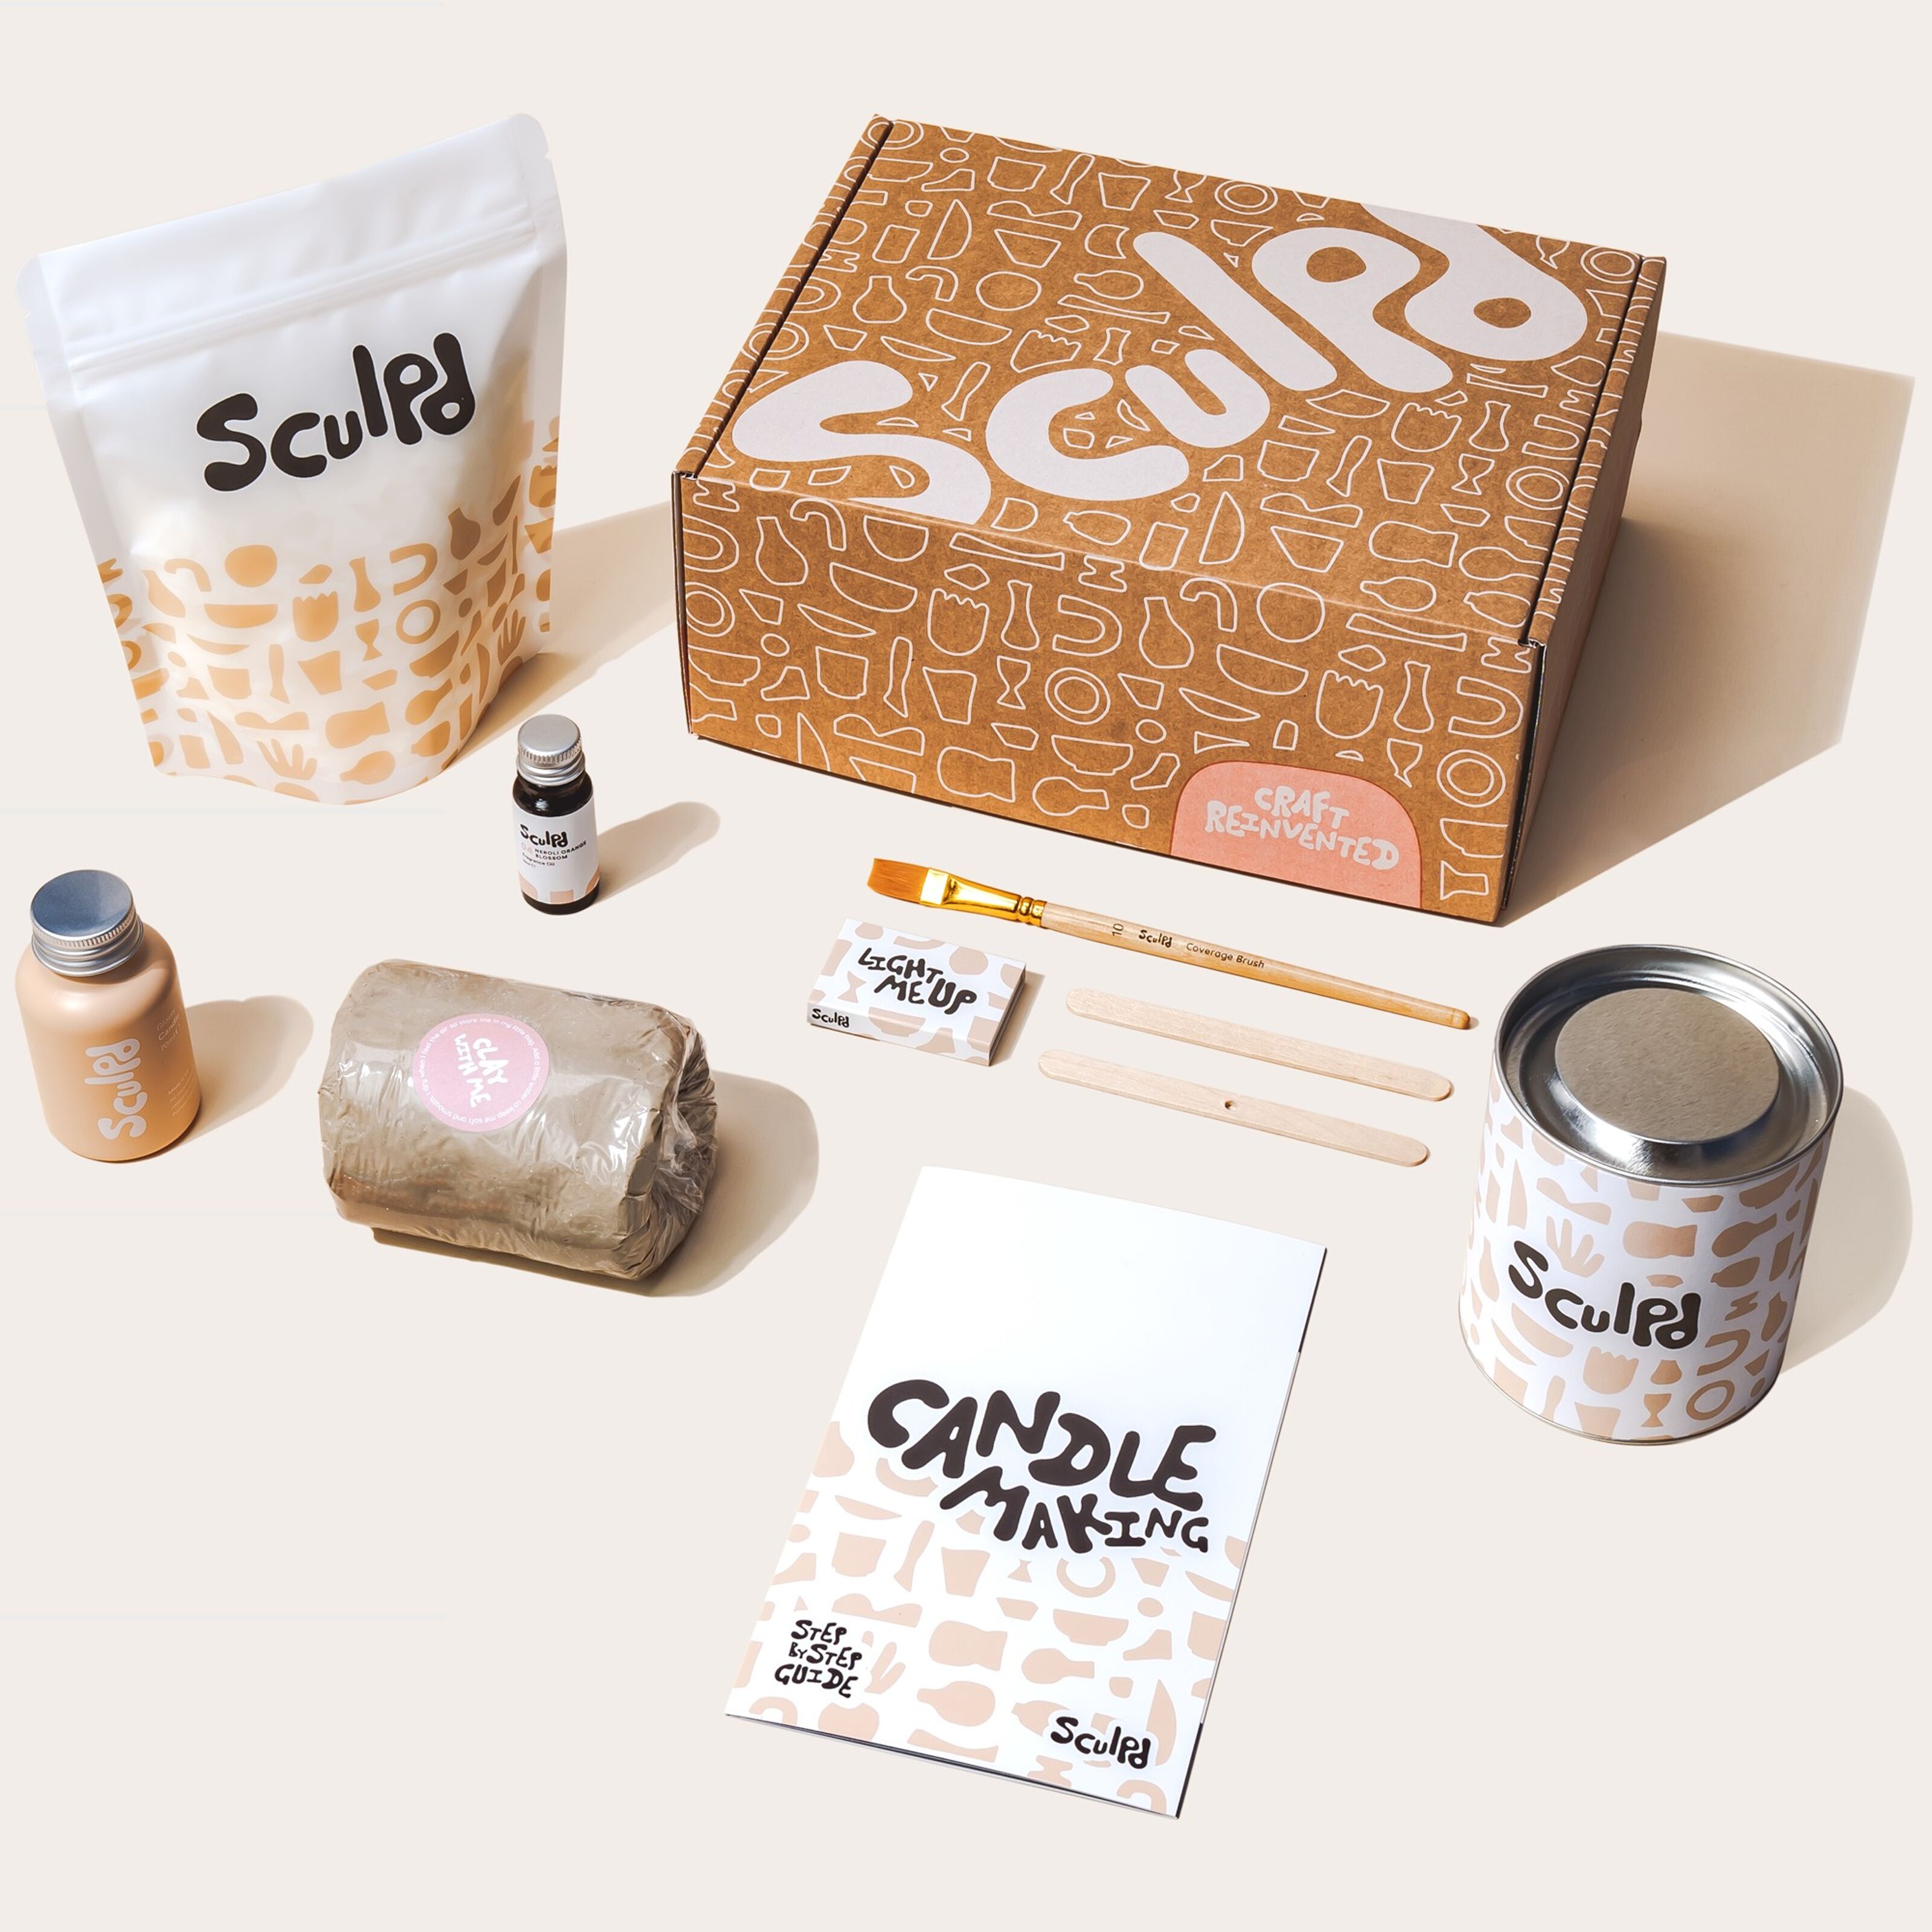 sculpd candle making pottery kit for two with air dry clay